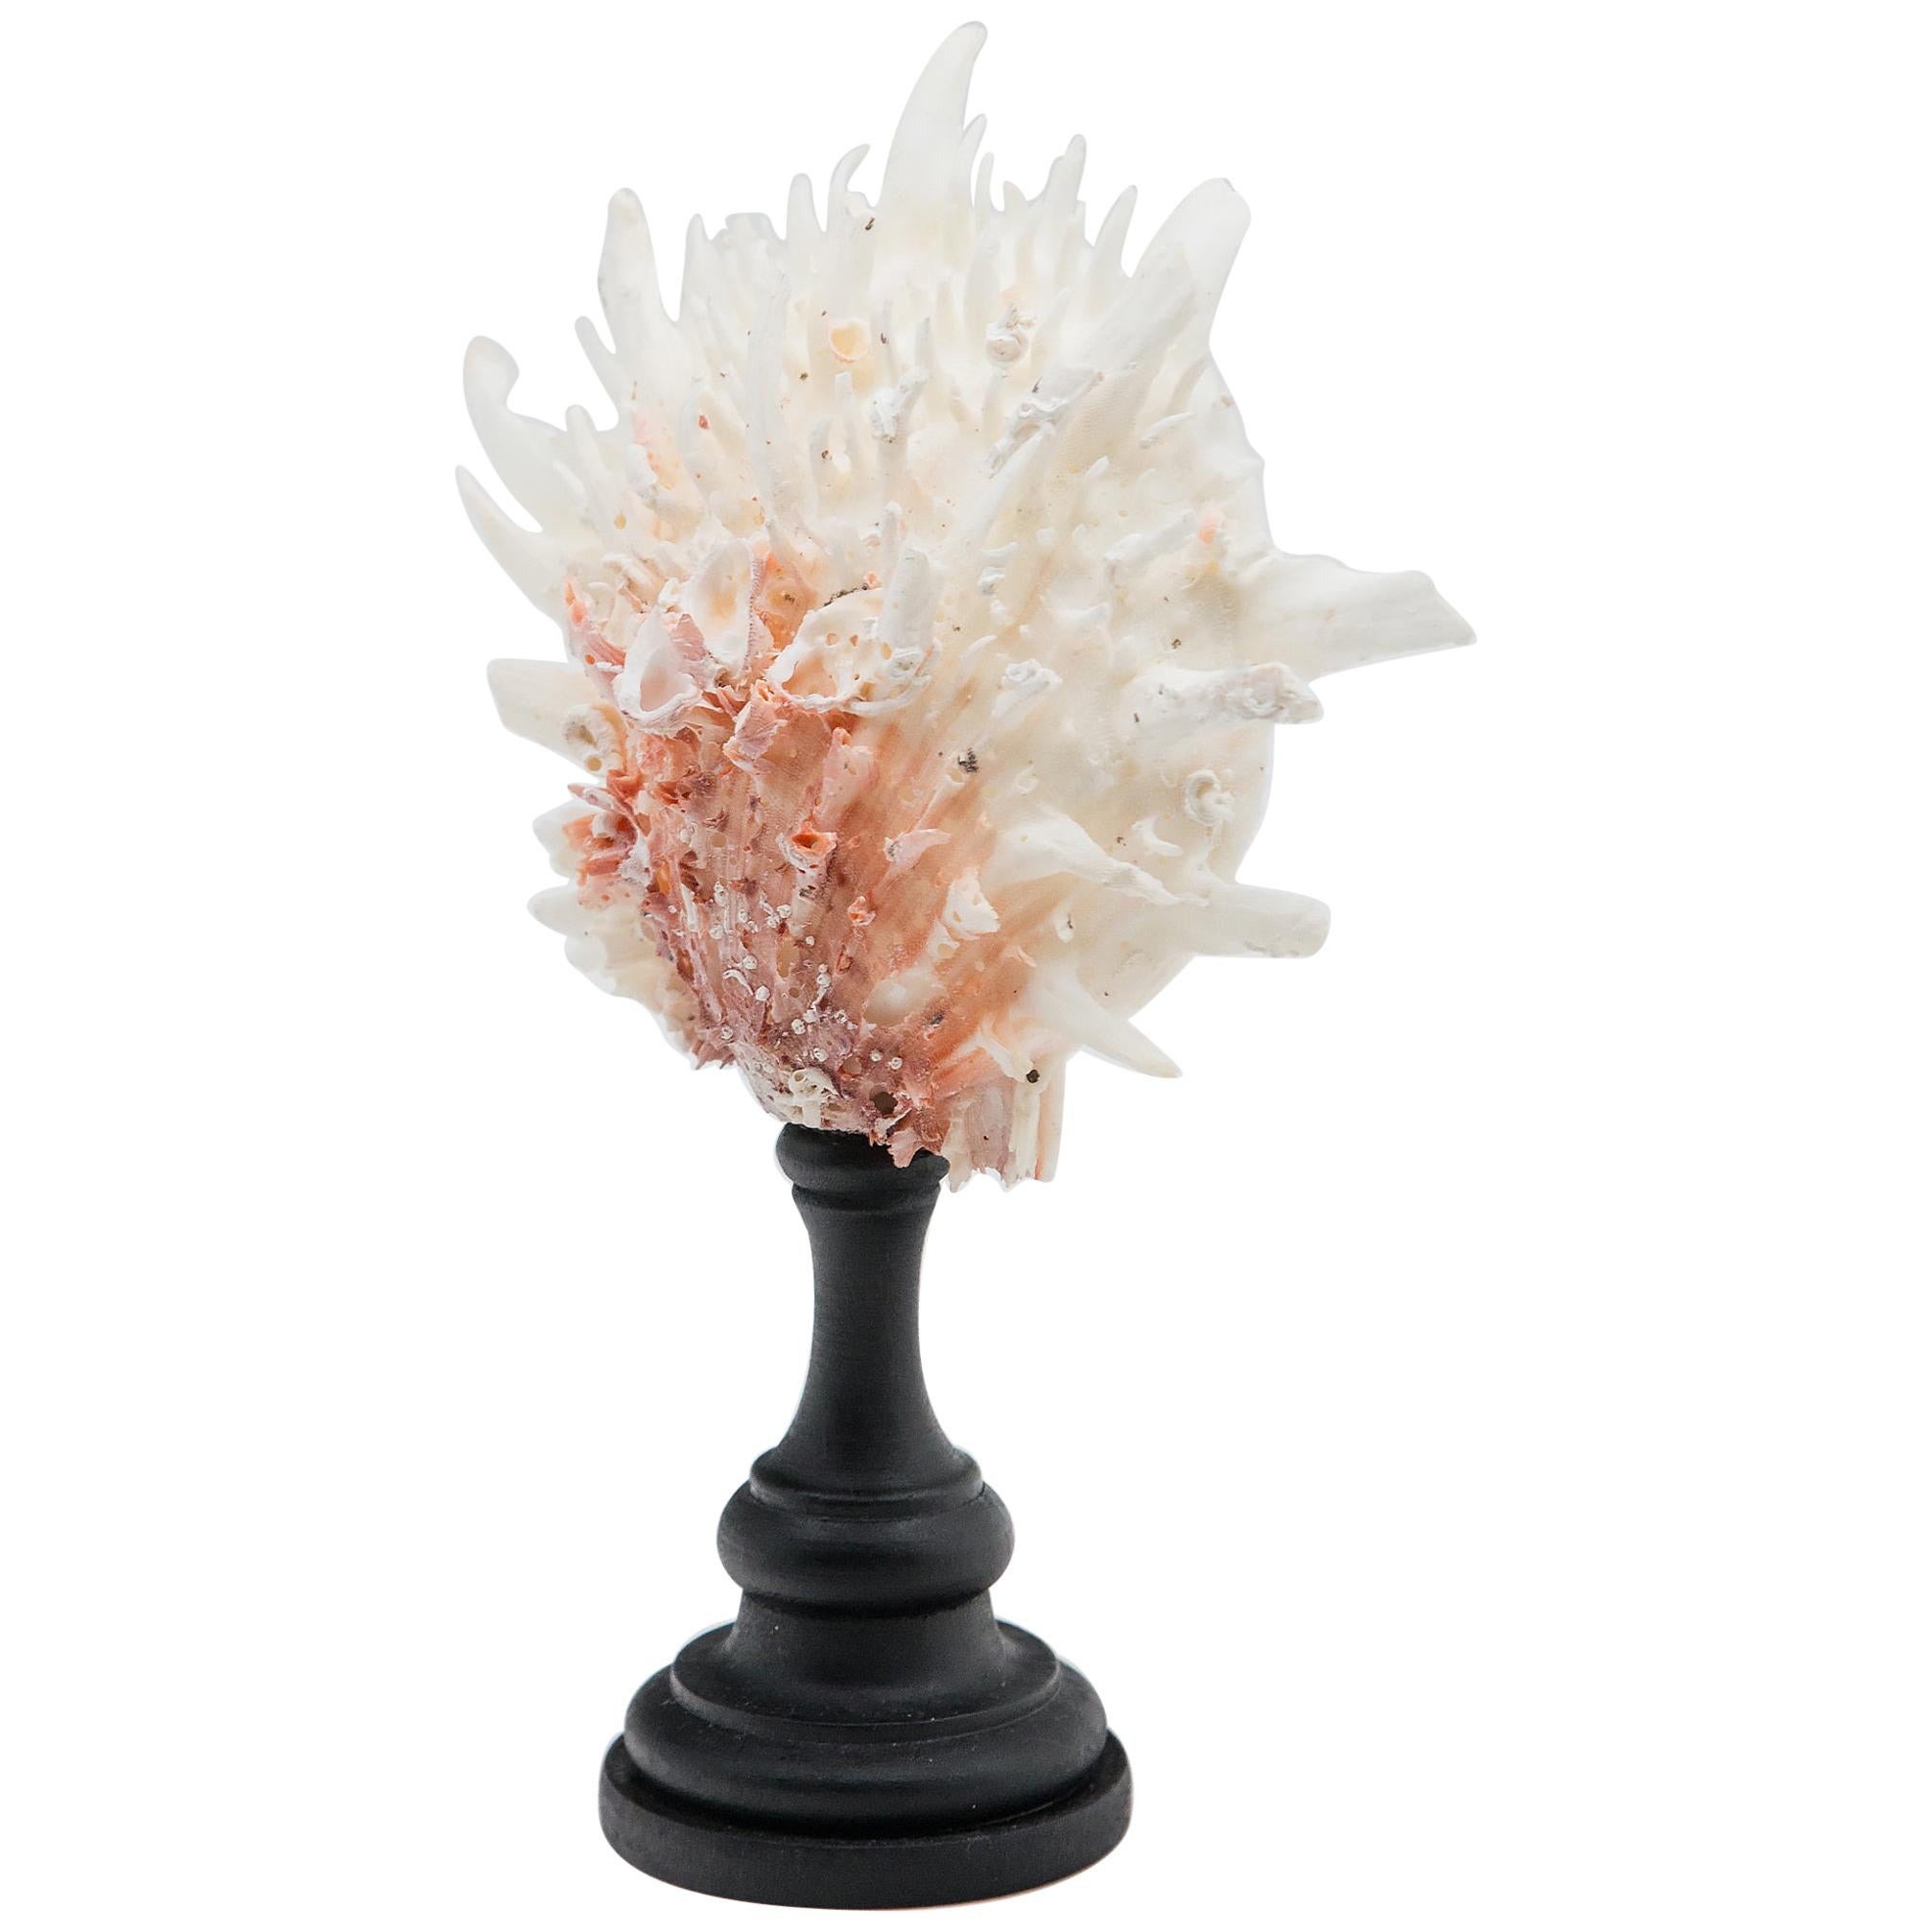 Mounted Pink and White Thorny Oyster on Turned Wood Stand